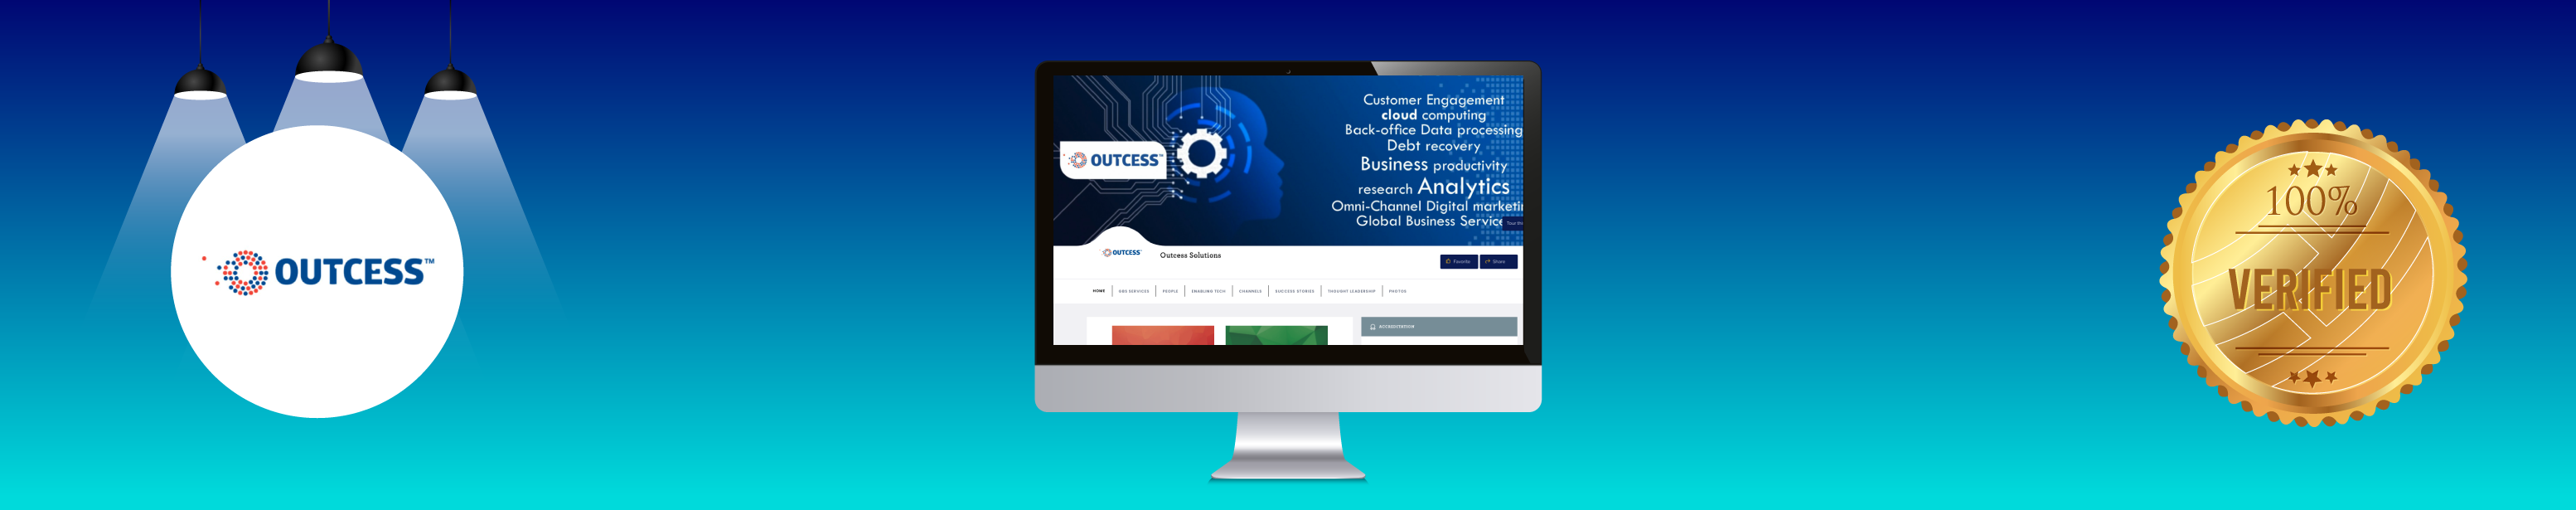 Outcess joins the GBS World Marketplace and Verified Program